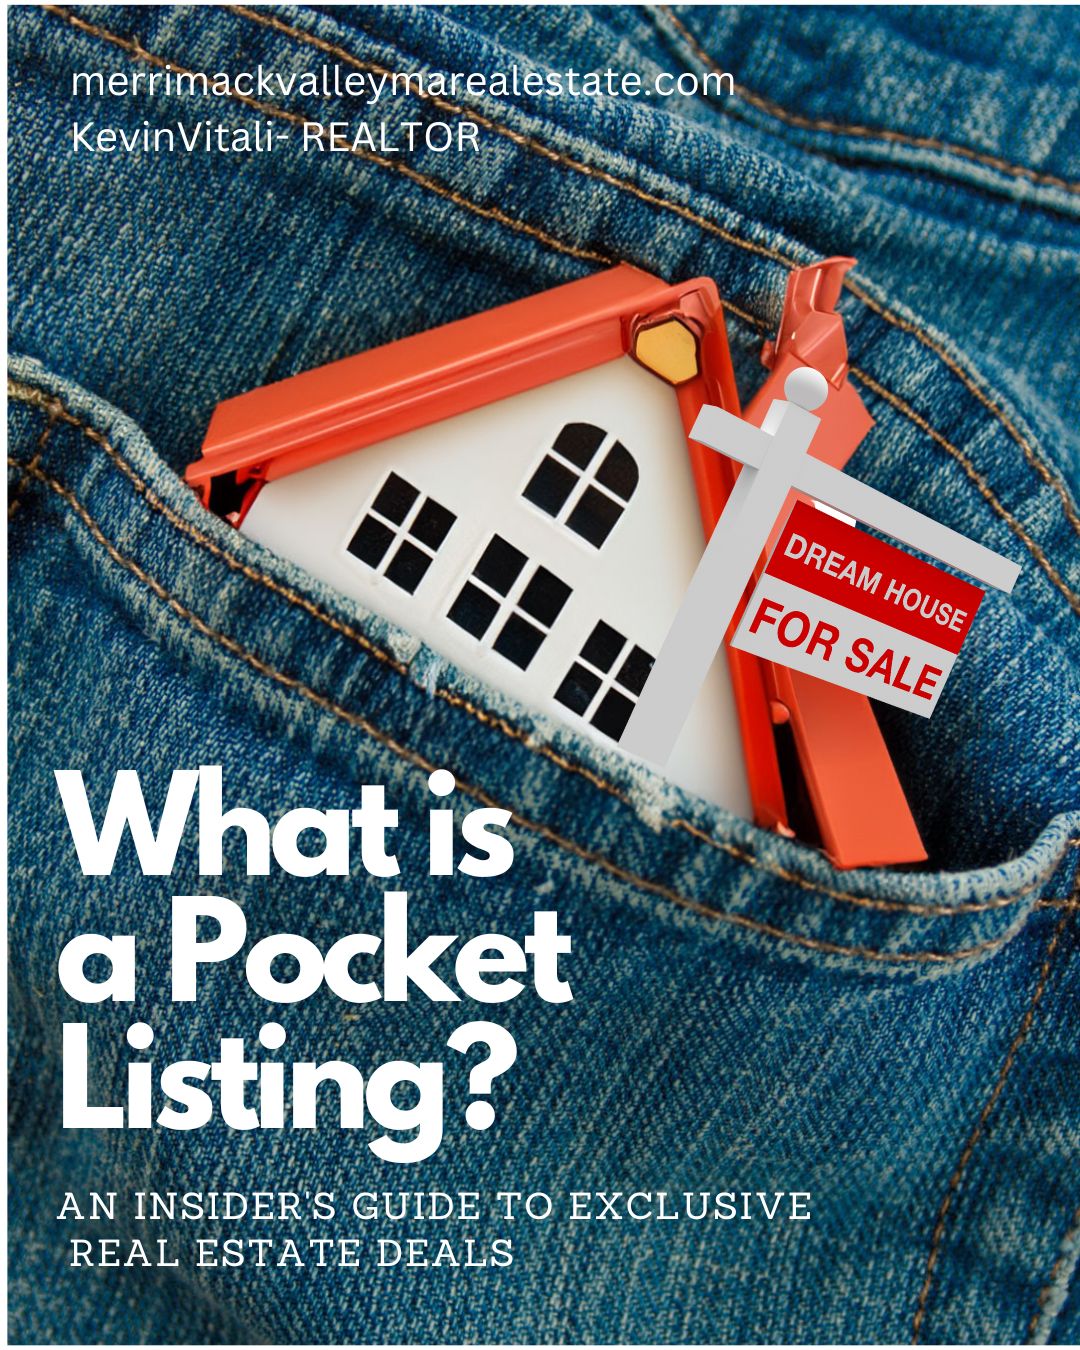 What is a pocket listing